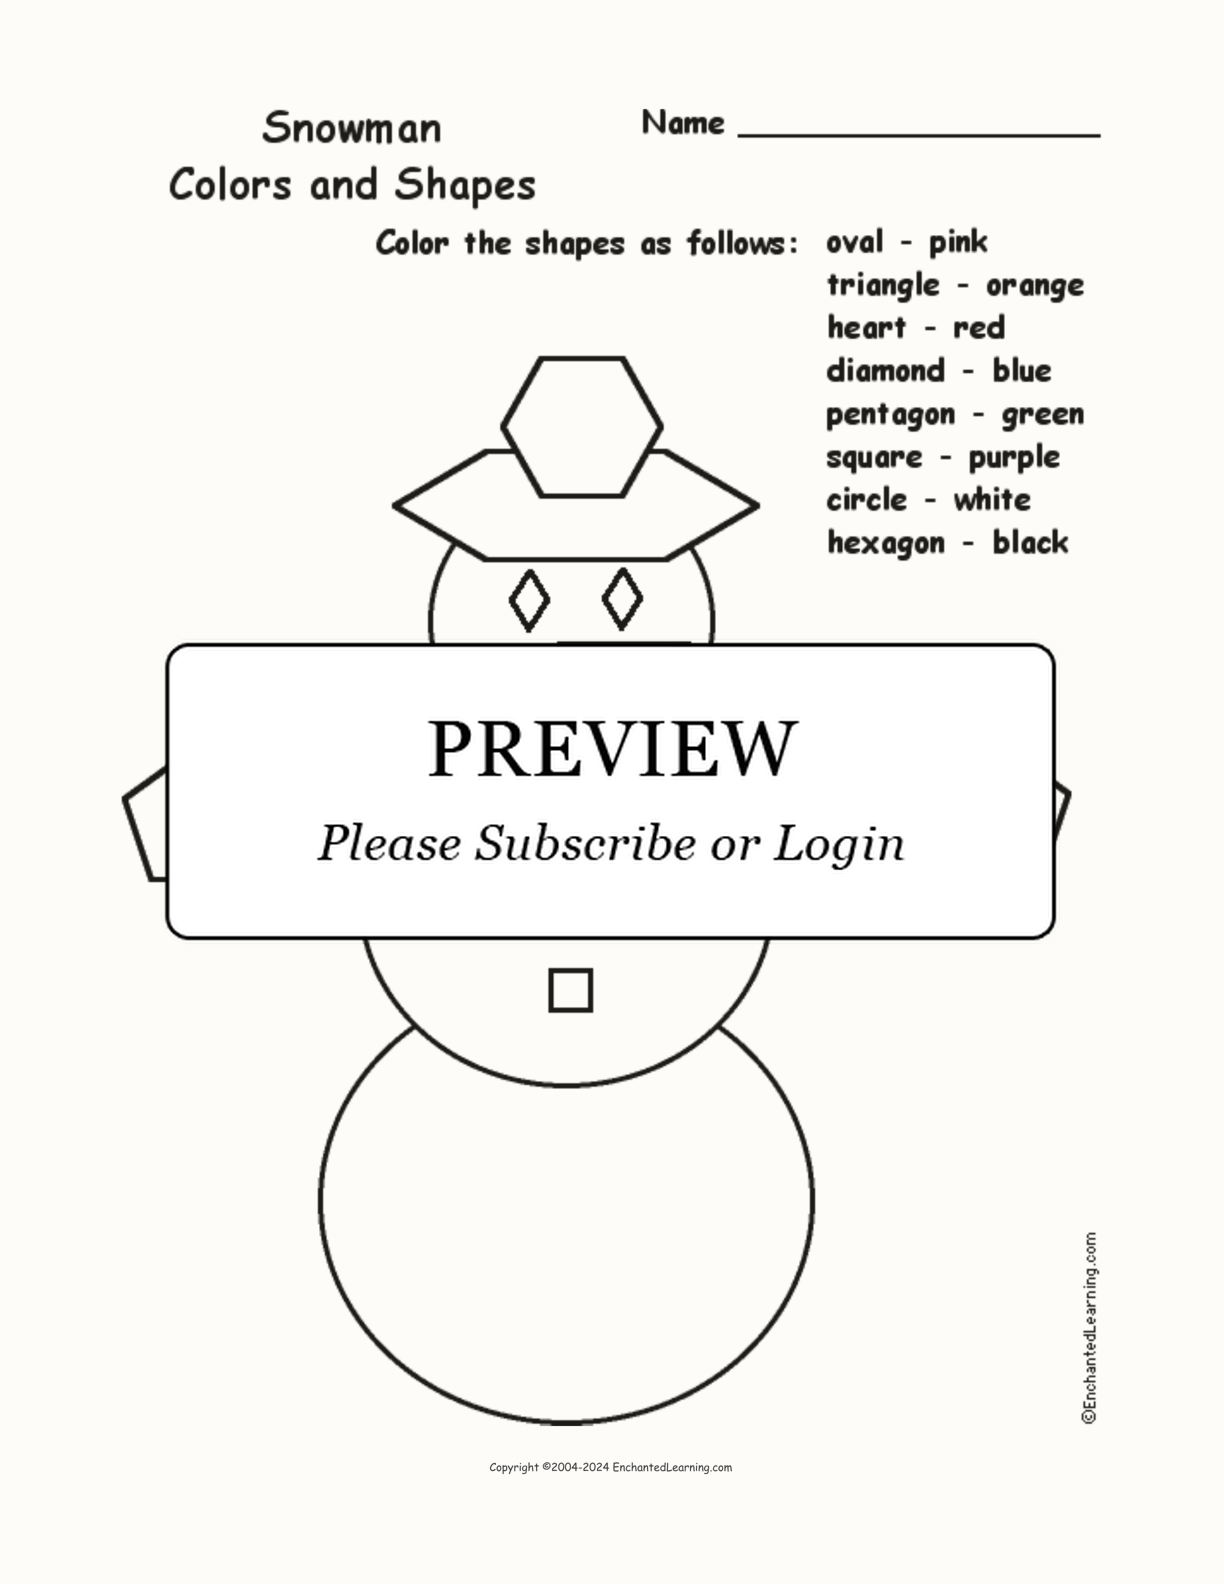 Snowman: Colors and Shapes interactive worksheet page 1